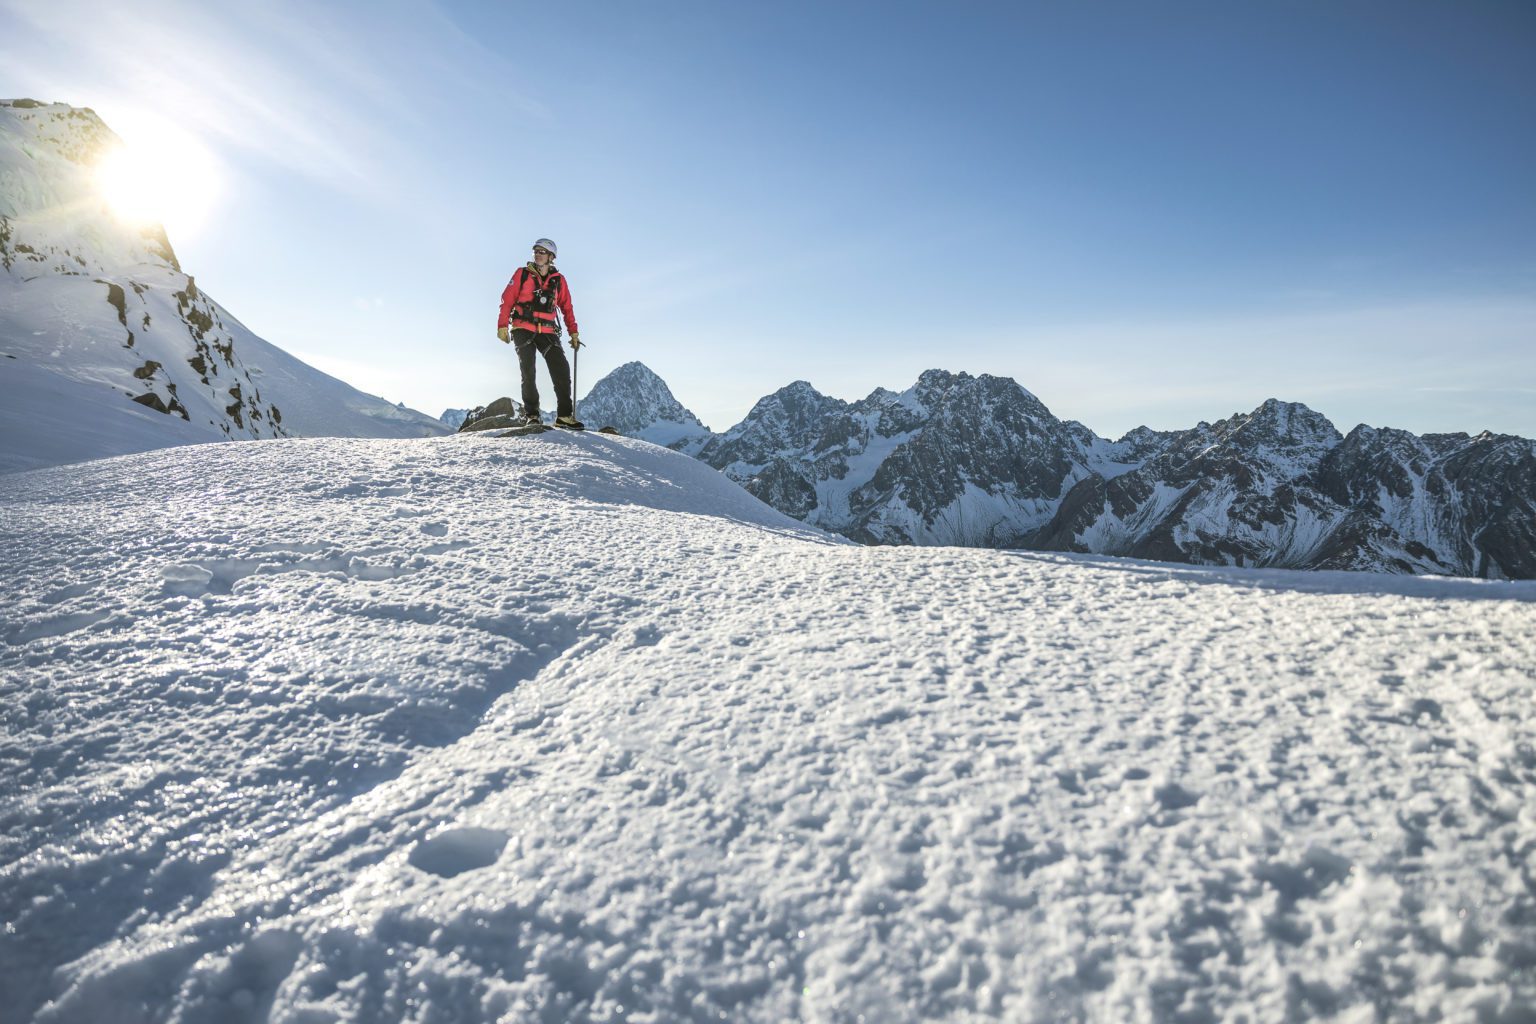 A lone climbers on a snowy mountaintop with more peaks in the background.